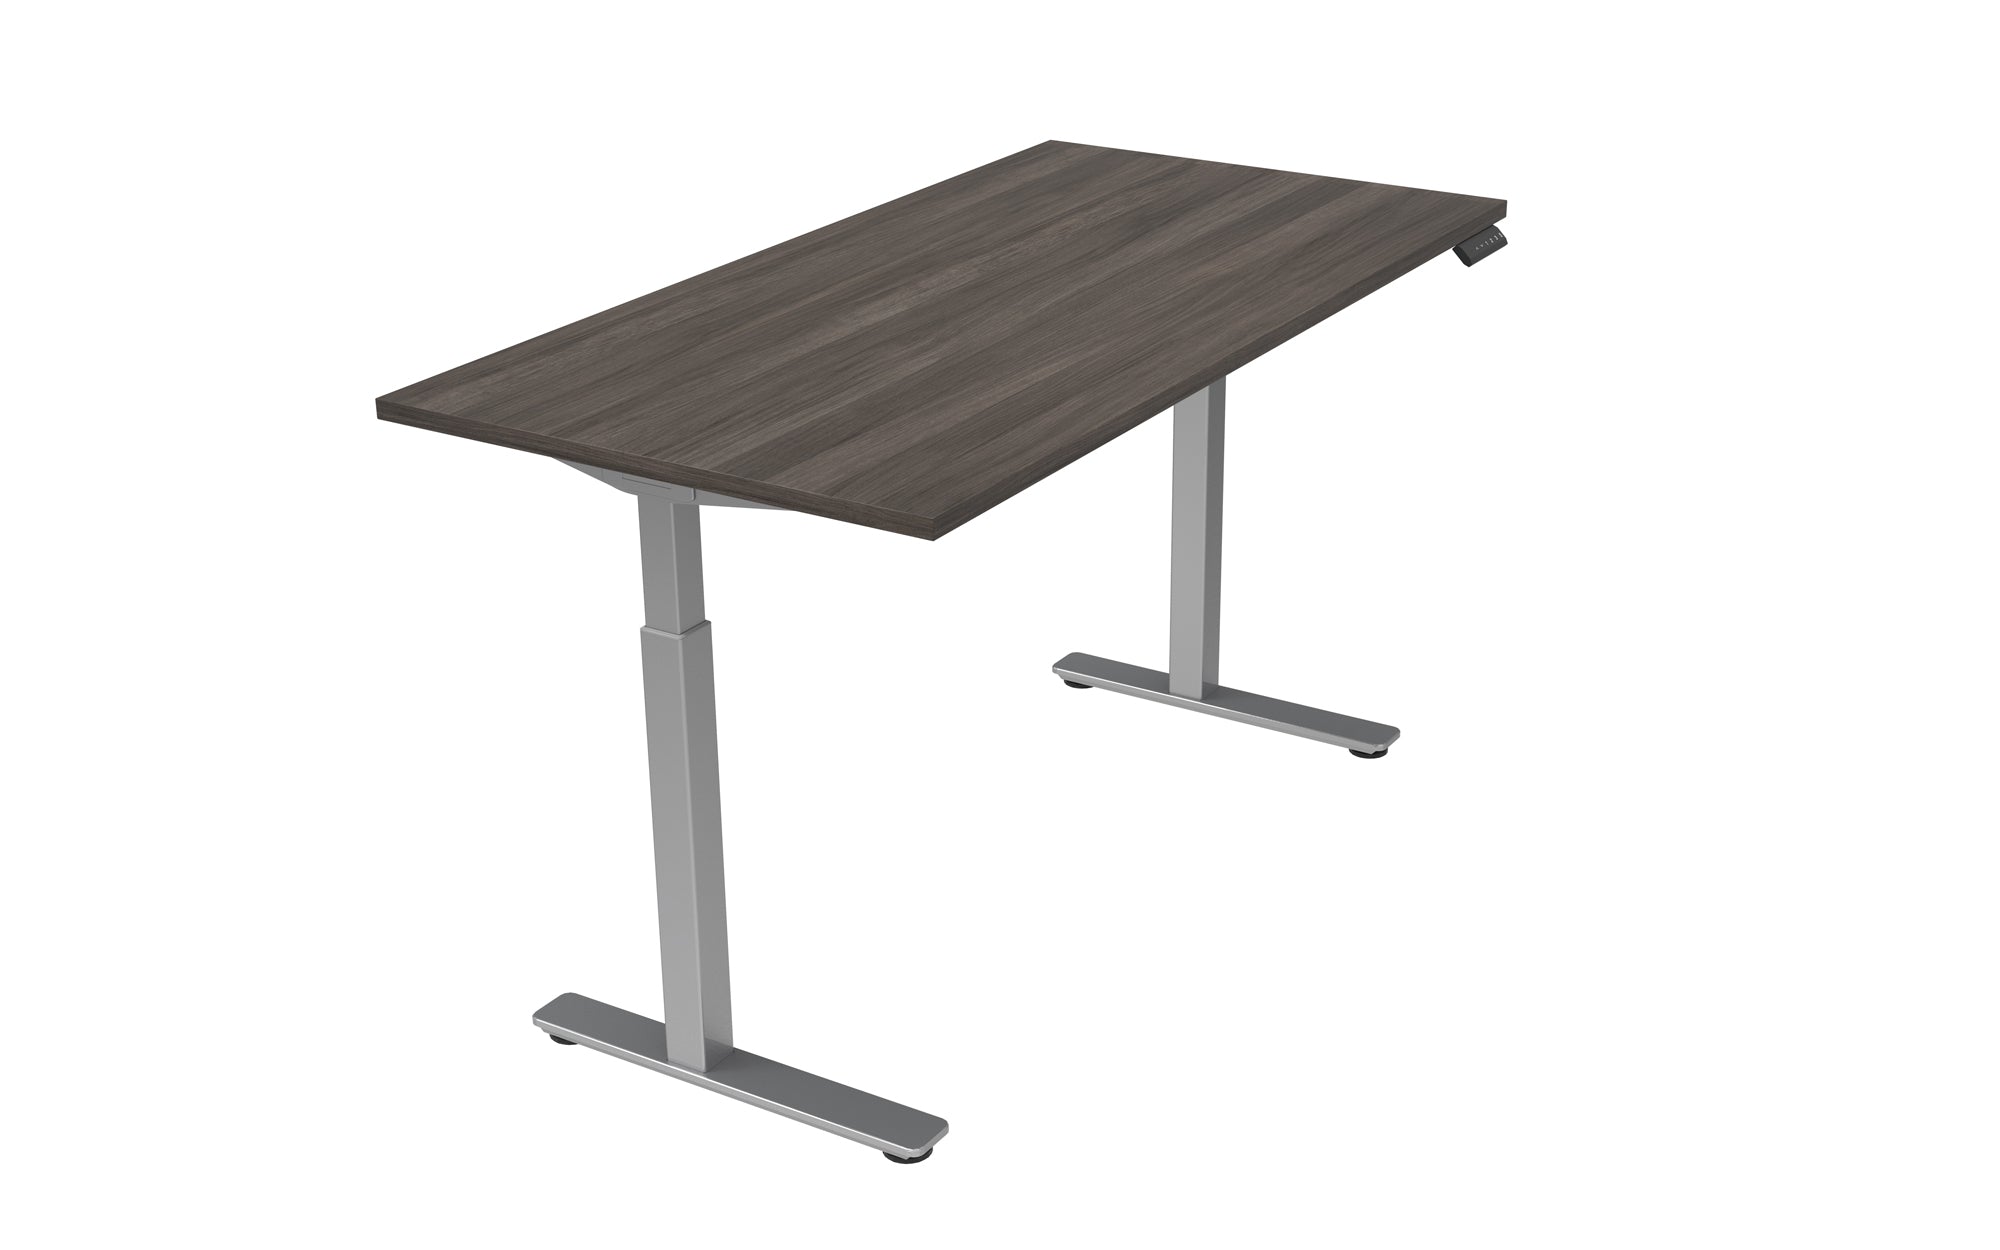 48"W x 24"D Height Adjustable Table Top and Base Unit